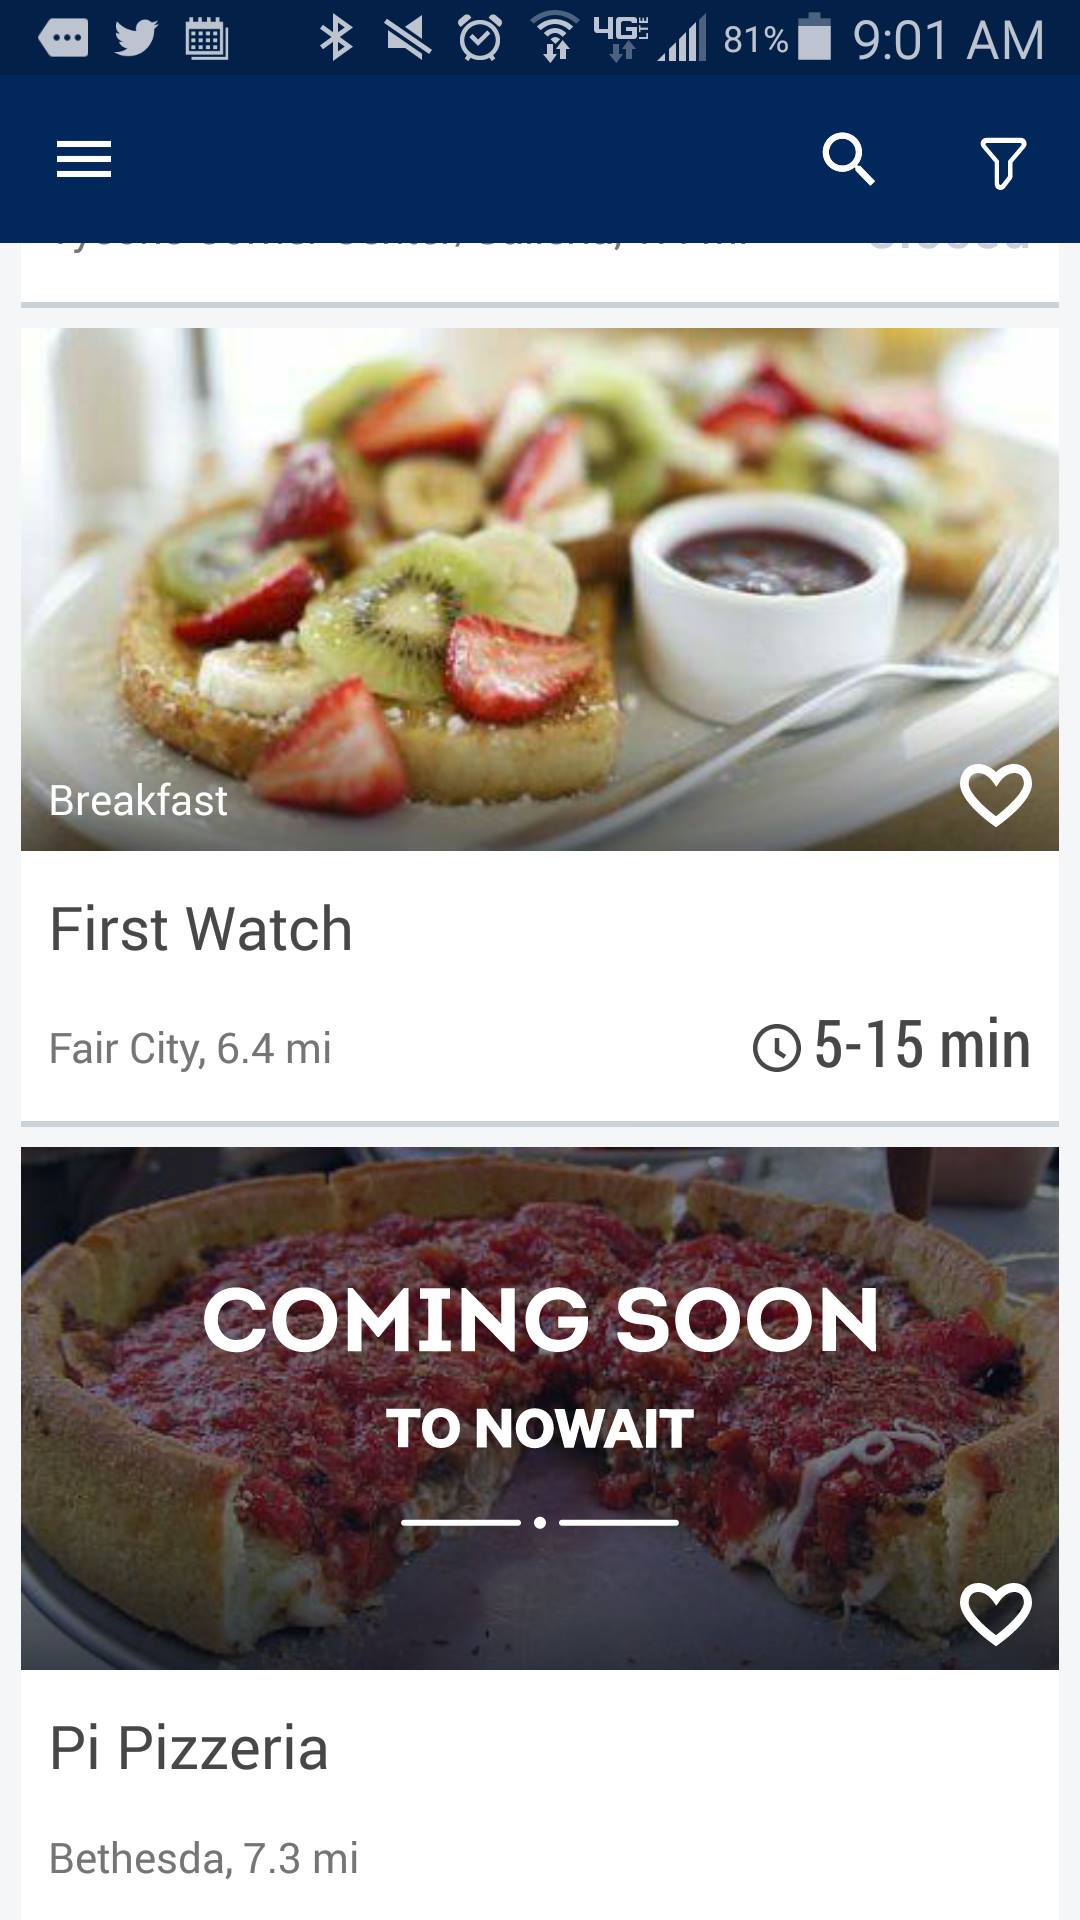 Check Restaurant Wait Times With This App and Join the Queue from Home ...